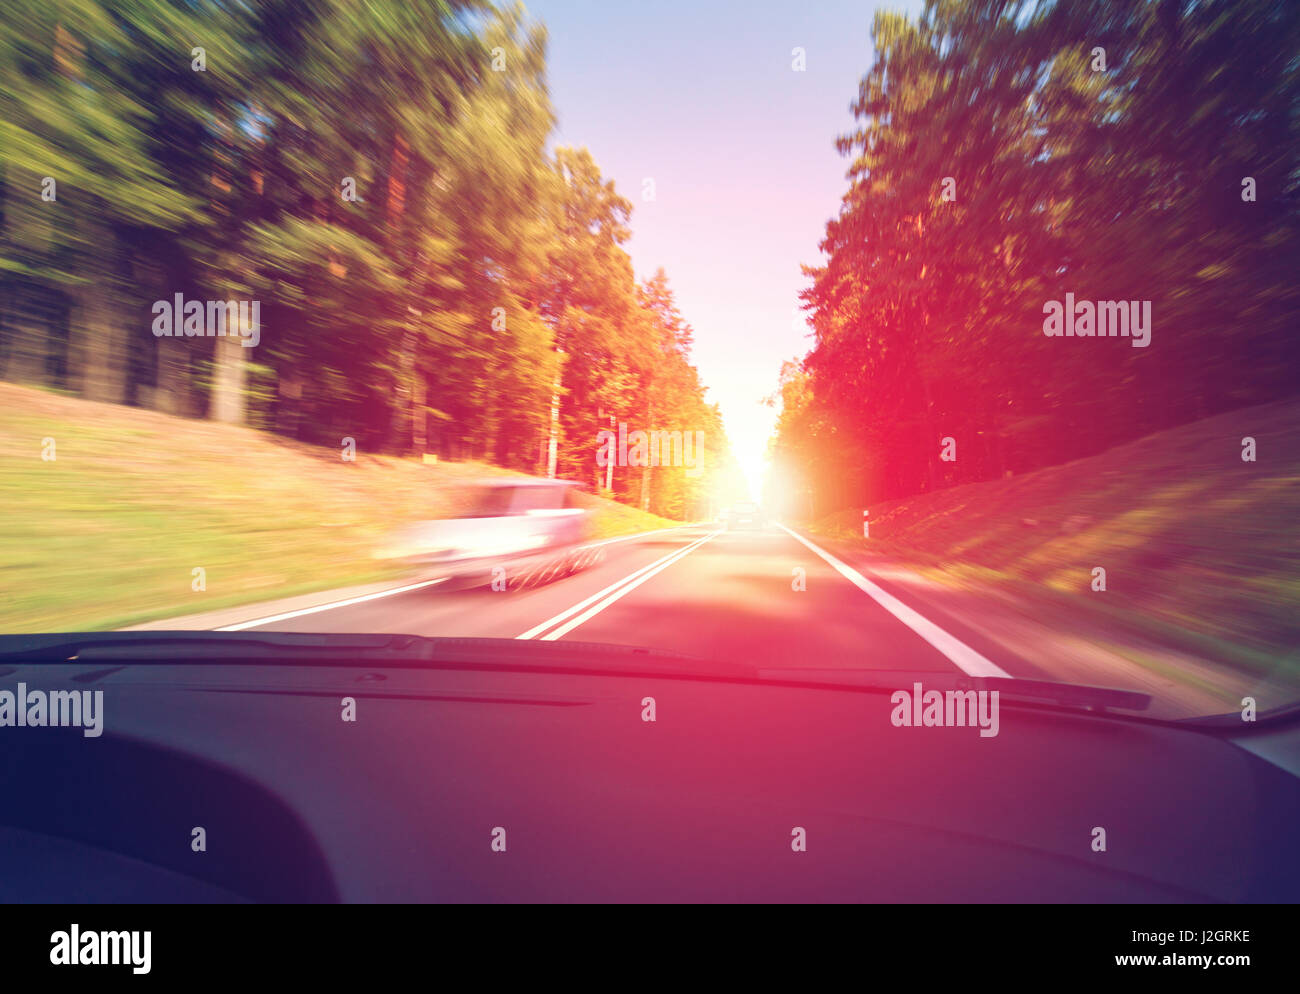 Driving a car in the morning to the sunrise in good weather conditions Stock Photo